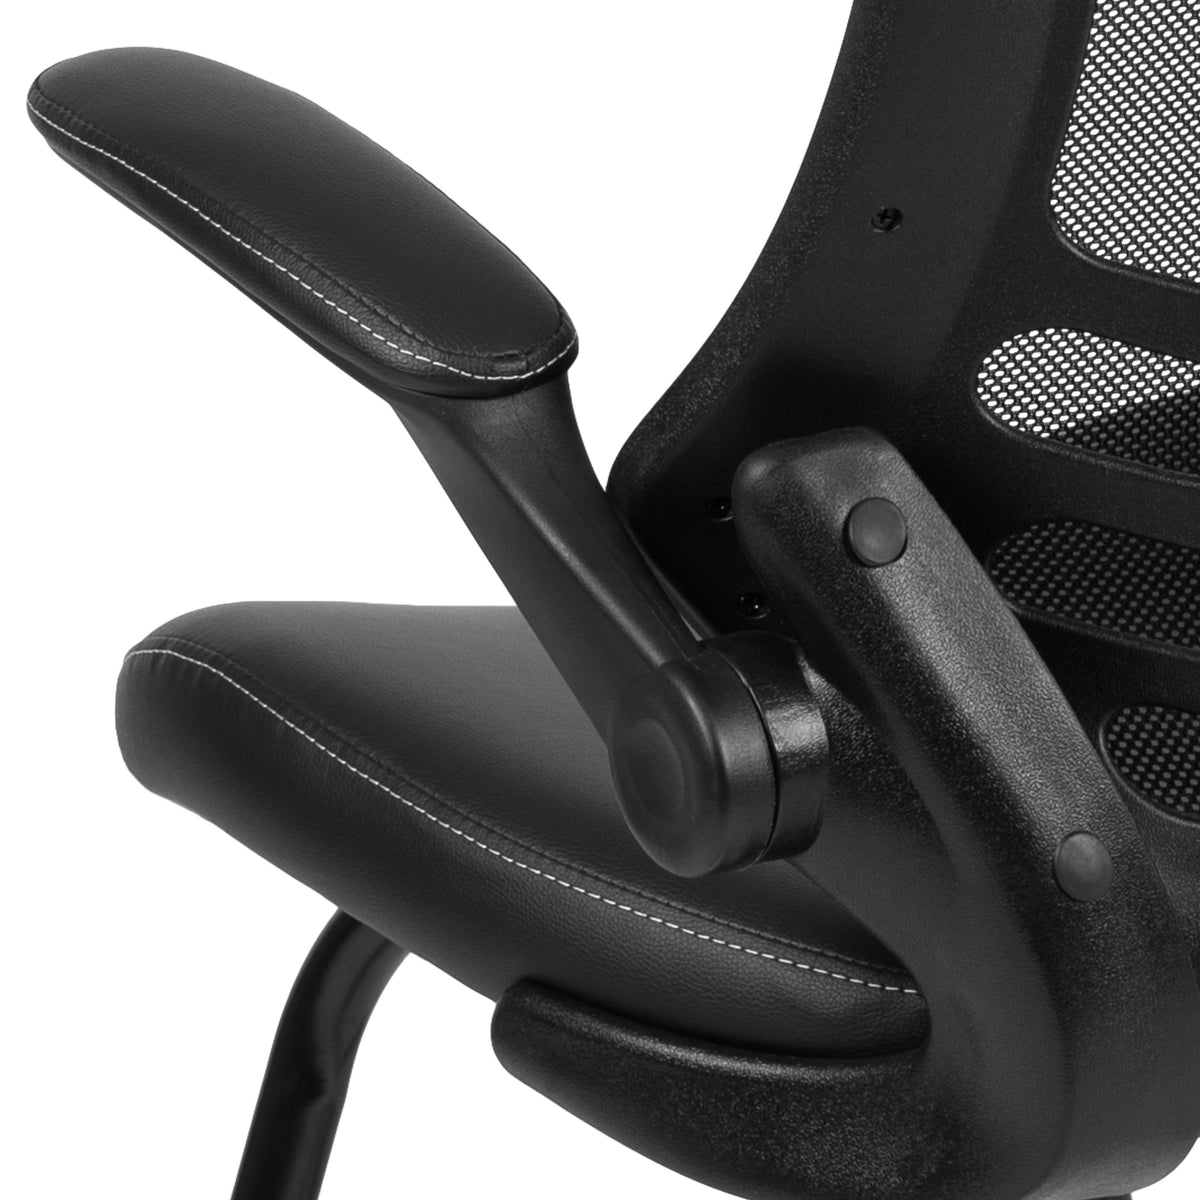 Black LeatherSoft/Mesh |#| Black Mesh Sled Base Side Reception Chair with LeatherSoft Seat and Flip-Up Arms